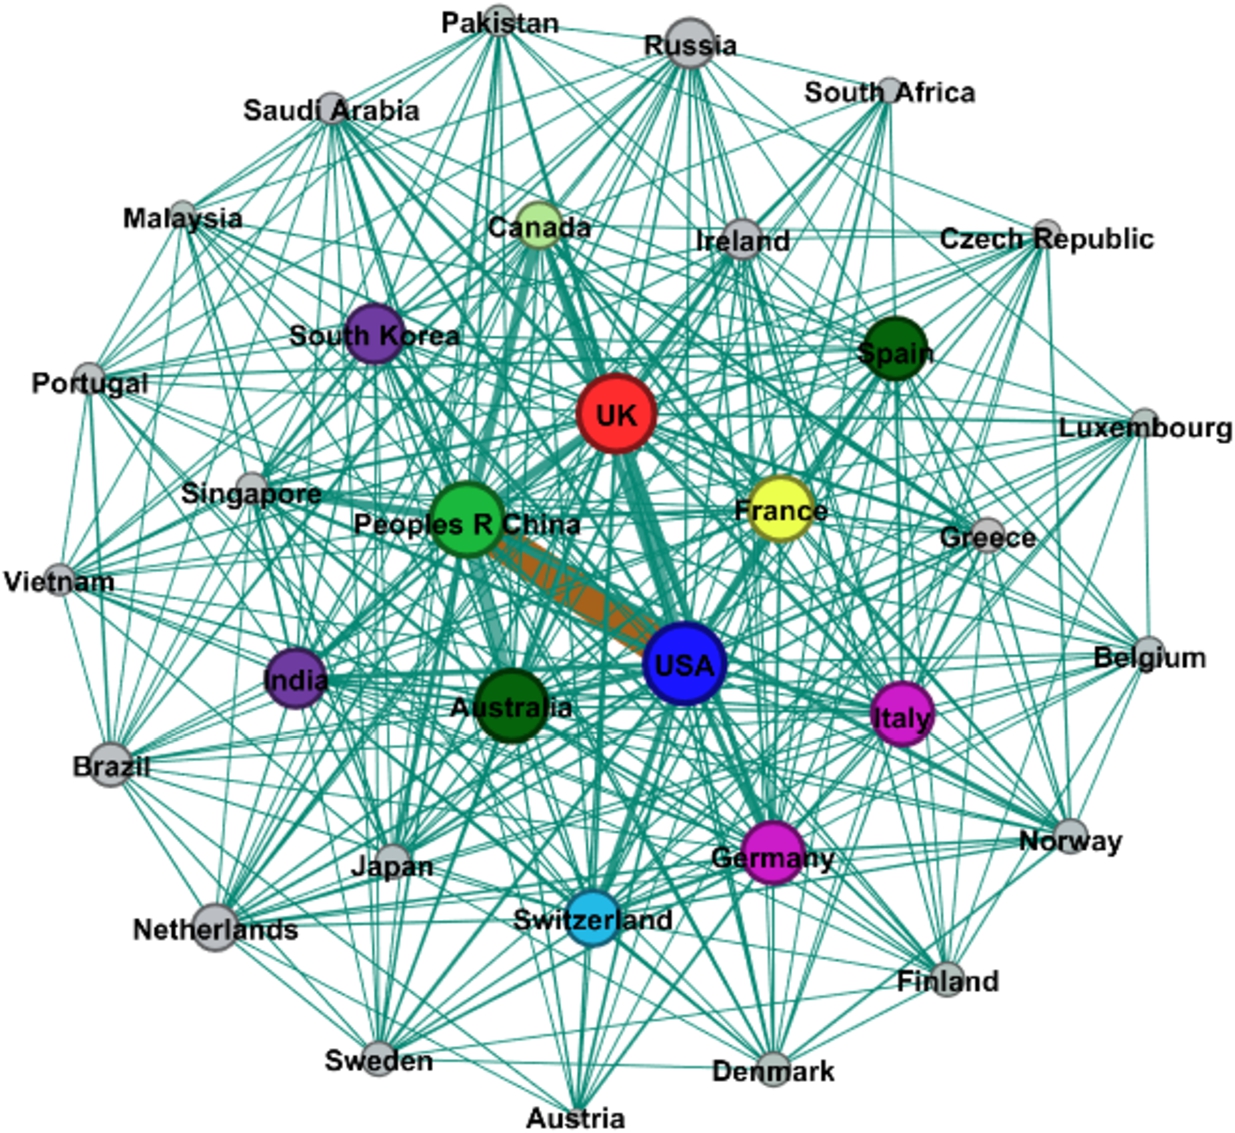 The collaboration network of countries.